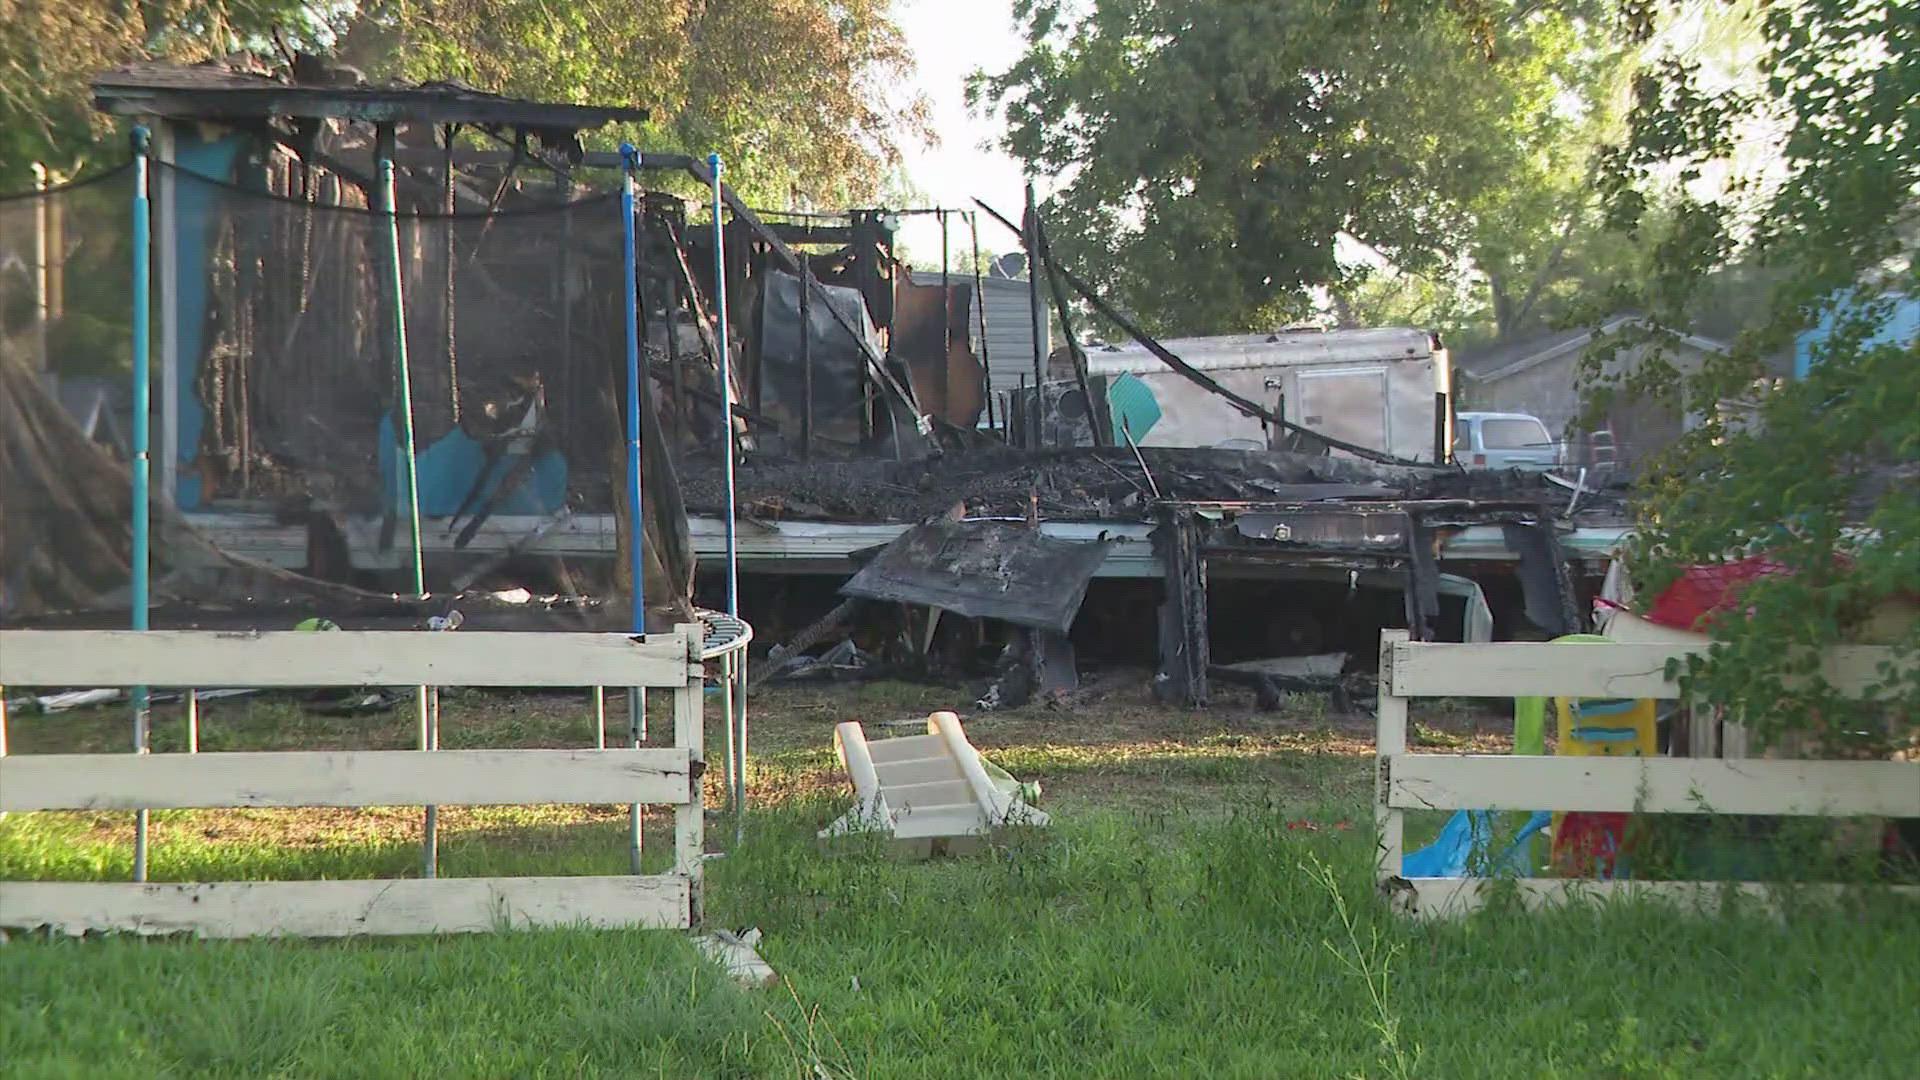 Four people, including two young children, were injured in a mobile home fire in Pearland Tuesday morning, according to fire officials.